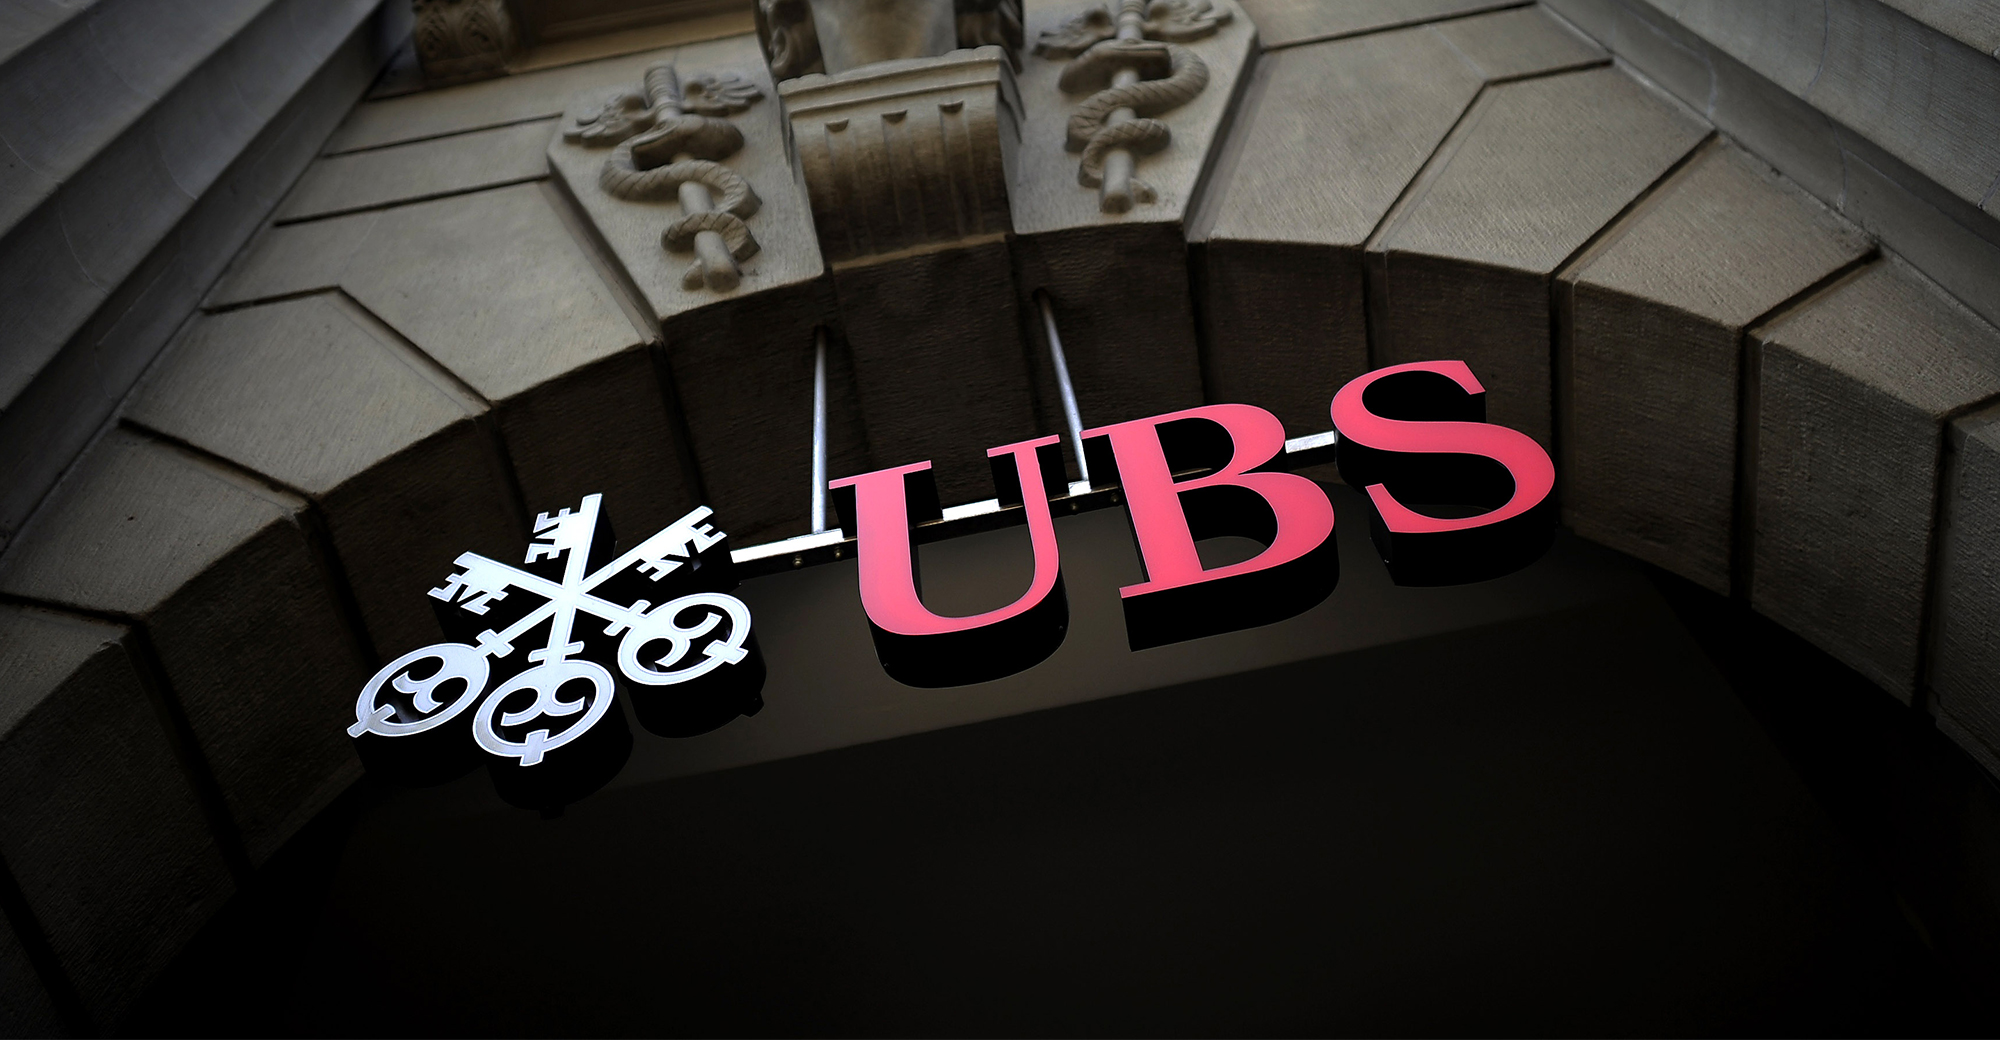 ubs office